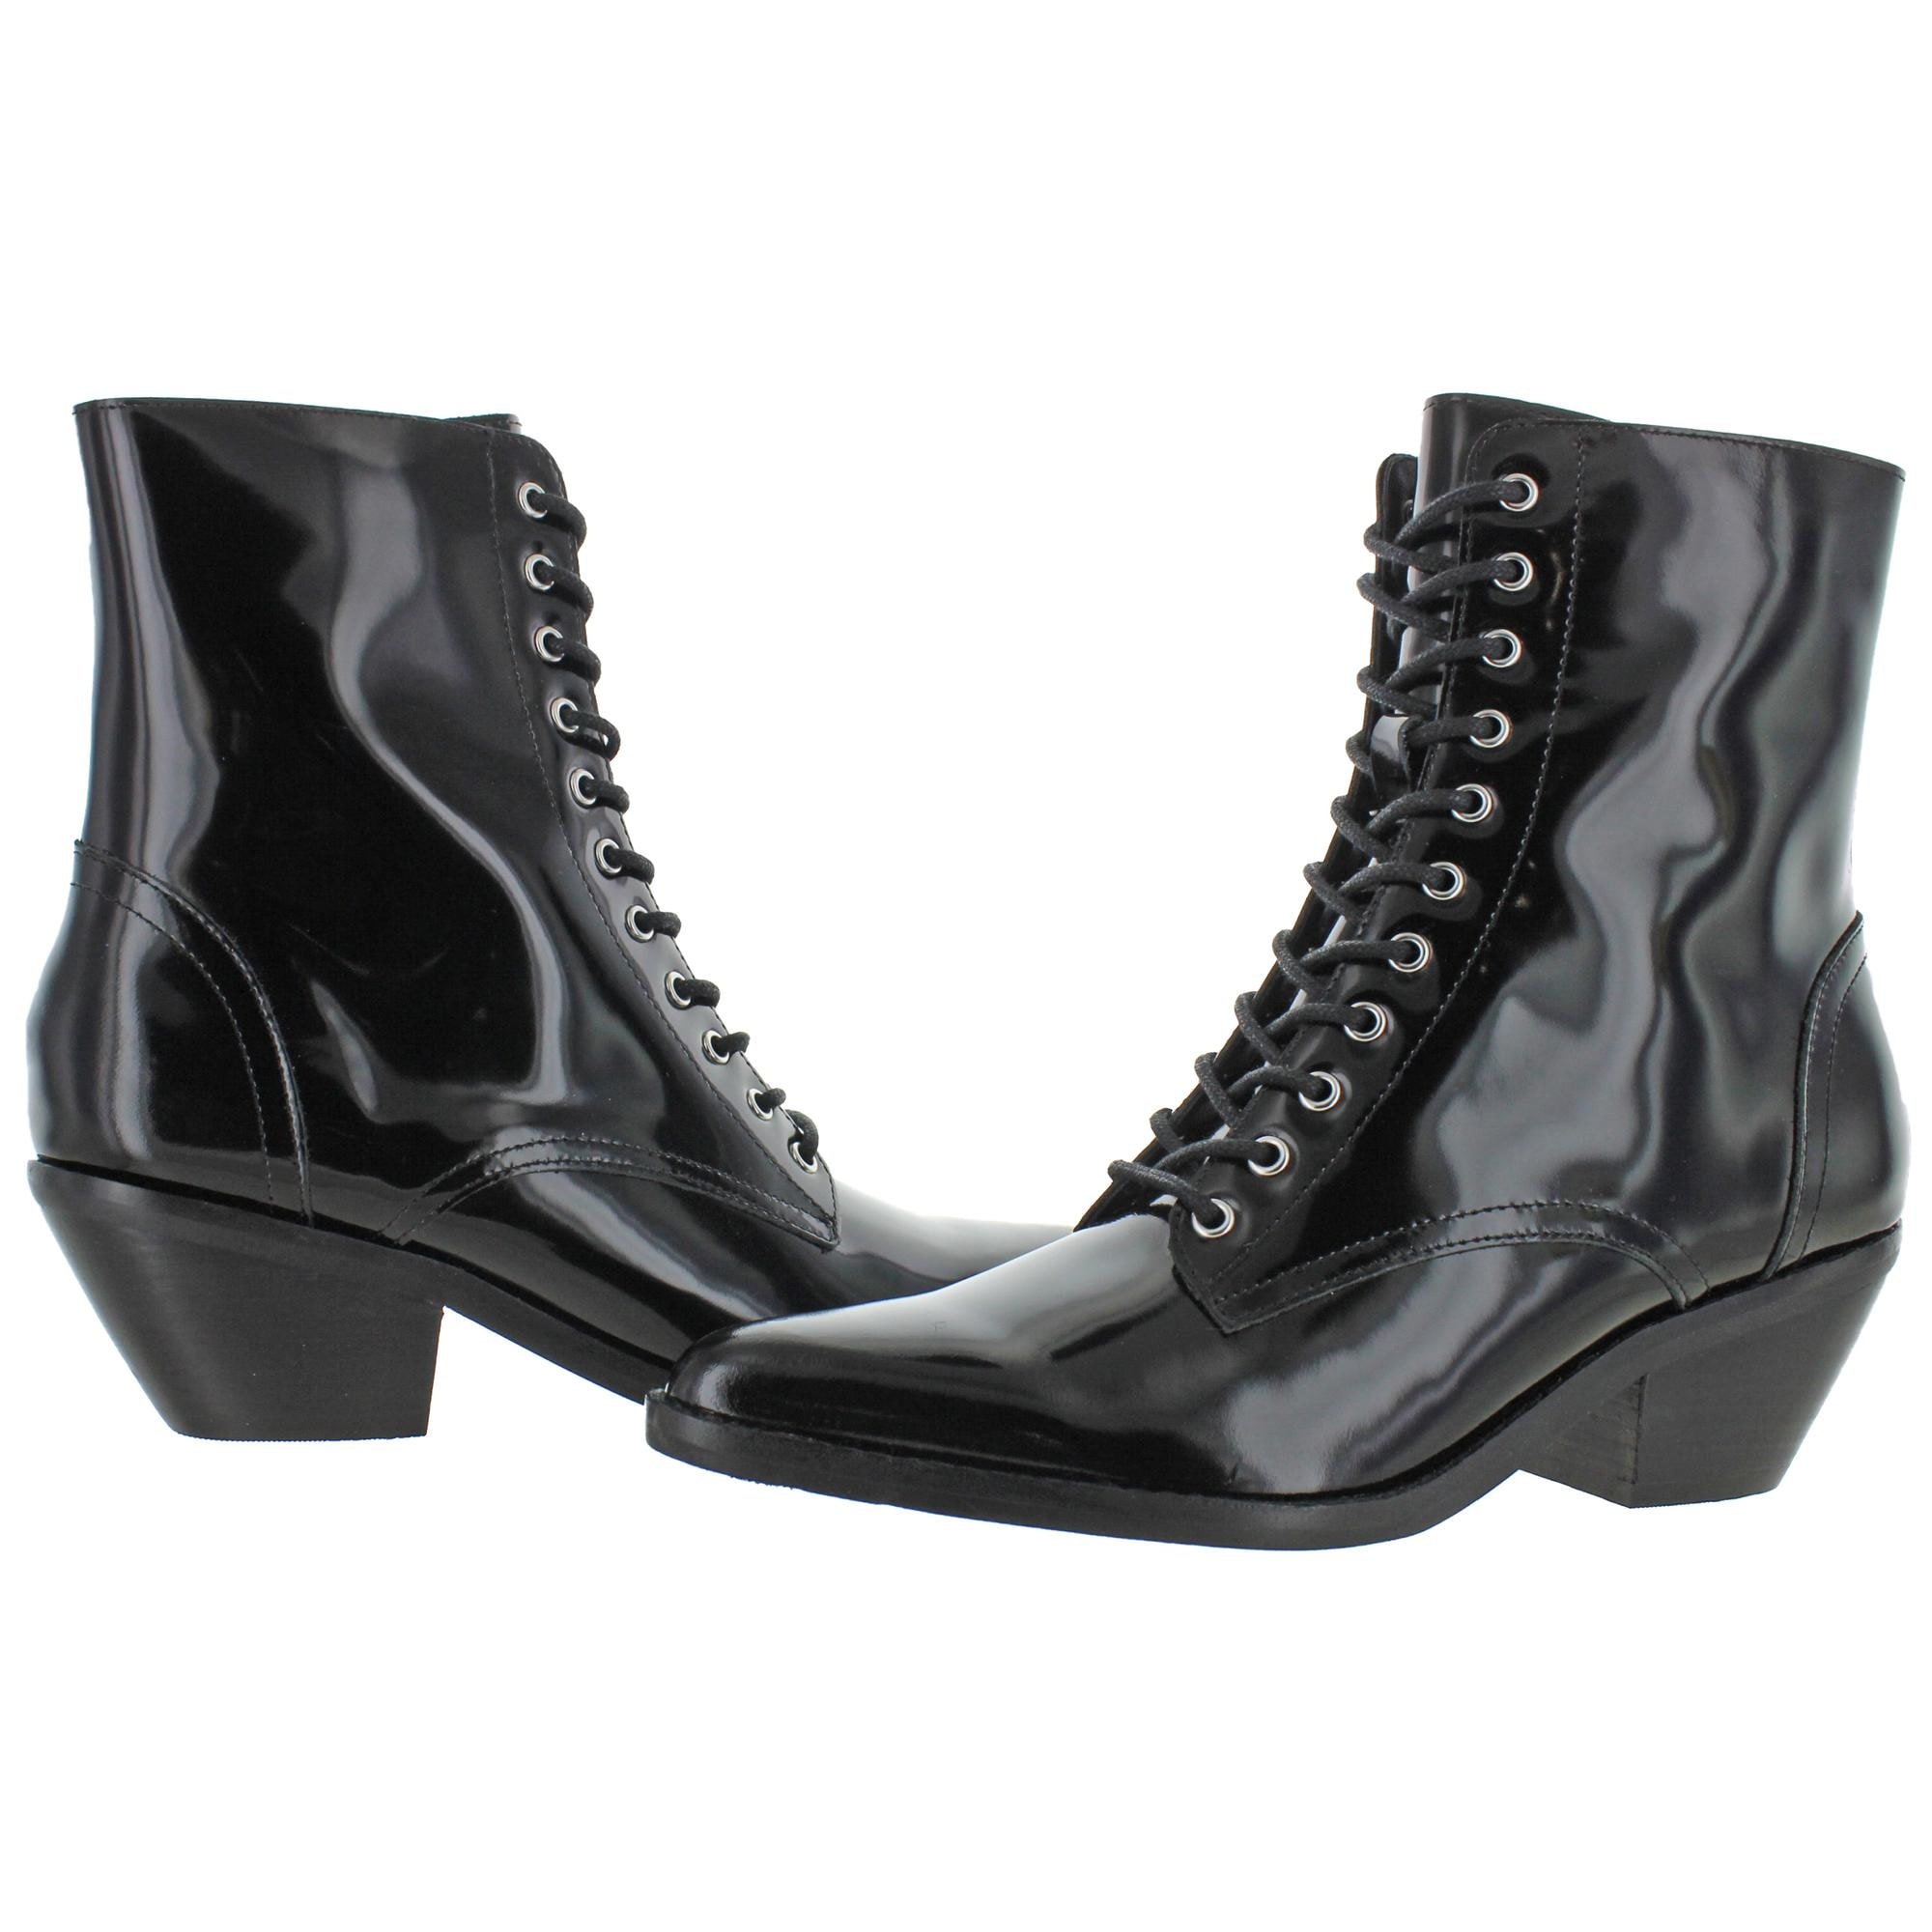 marc fisher ltd waren lace up ankle boot